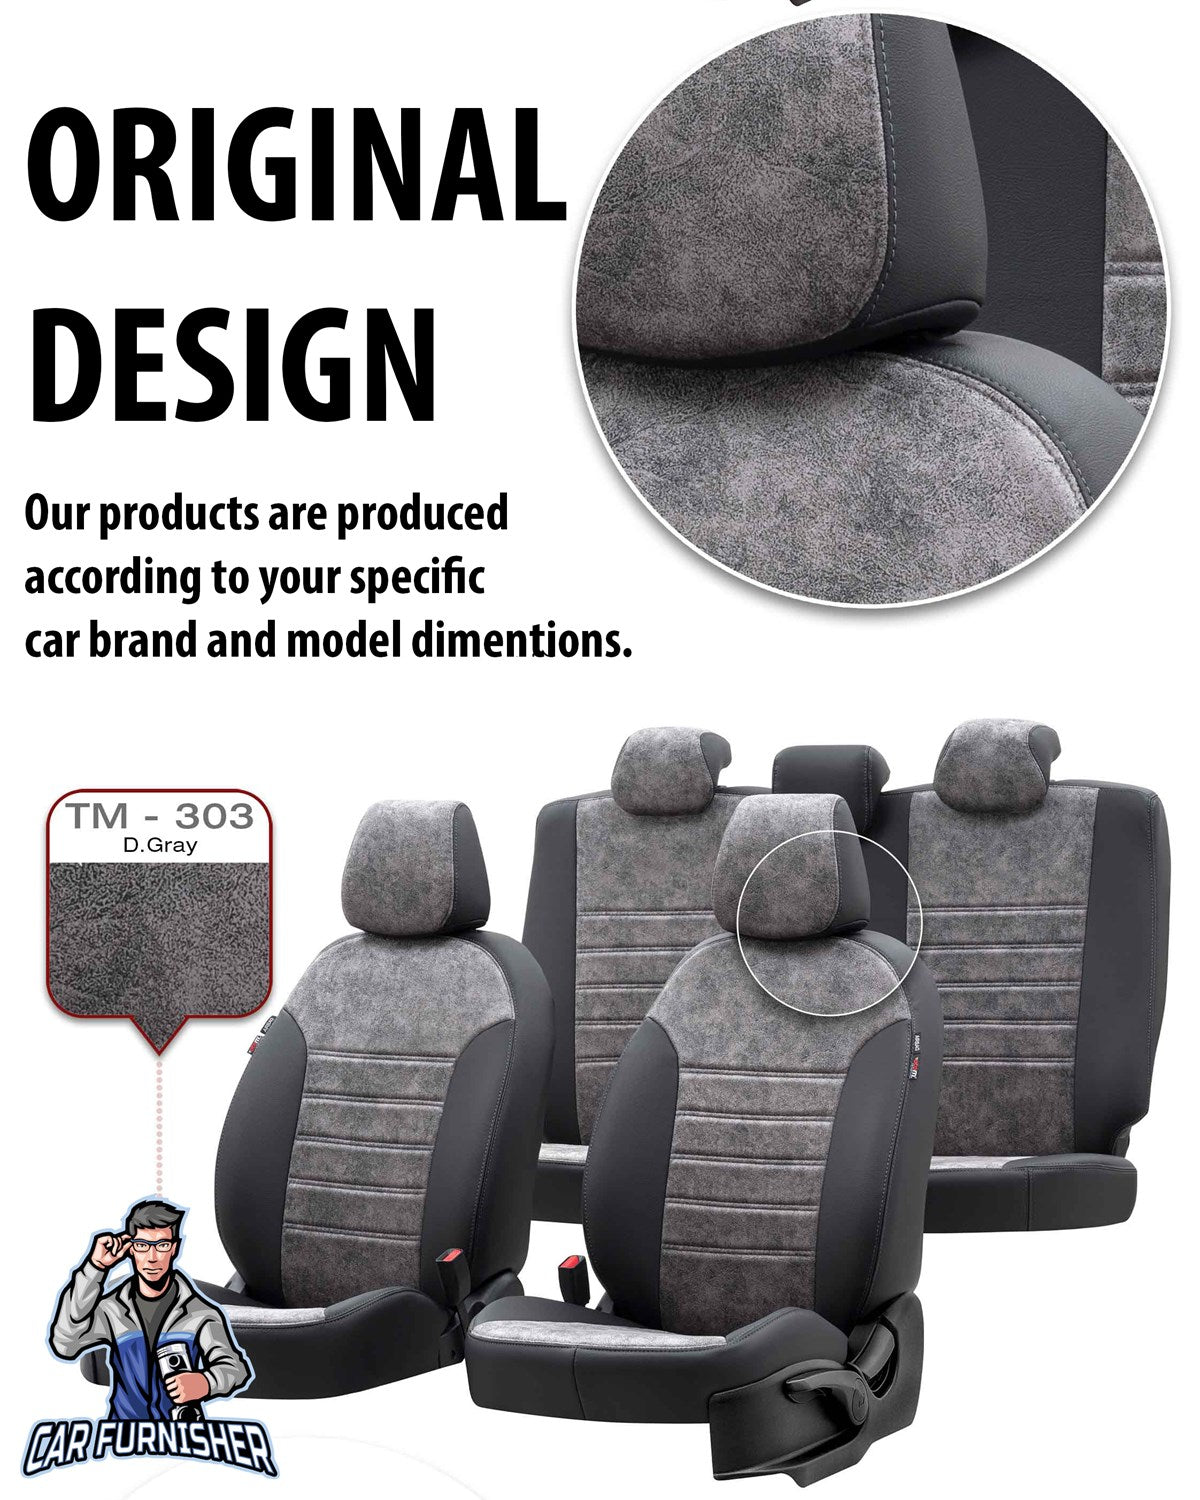 Volvo S80 Seat Cover Milano Suede Design Burgundy Leather & Suede Fabric